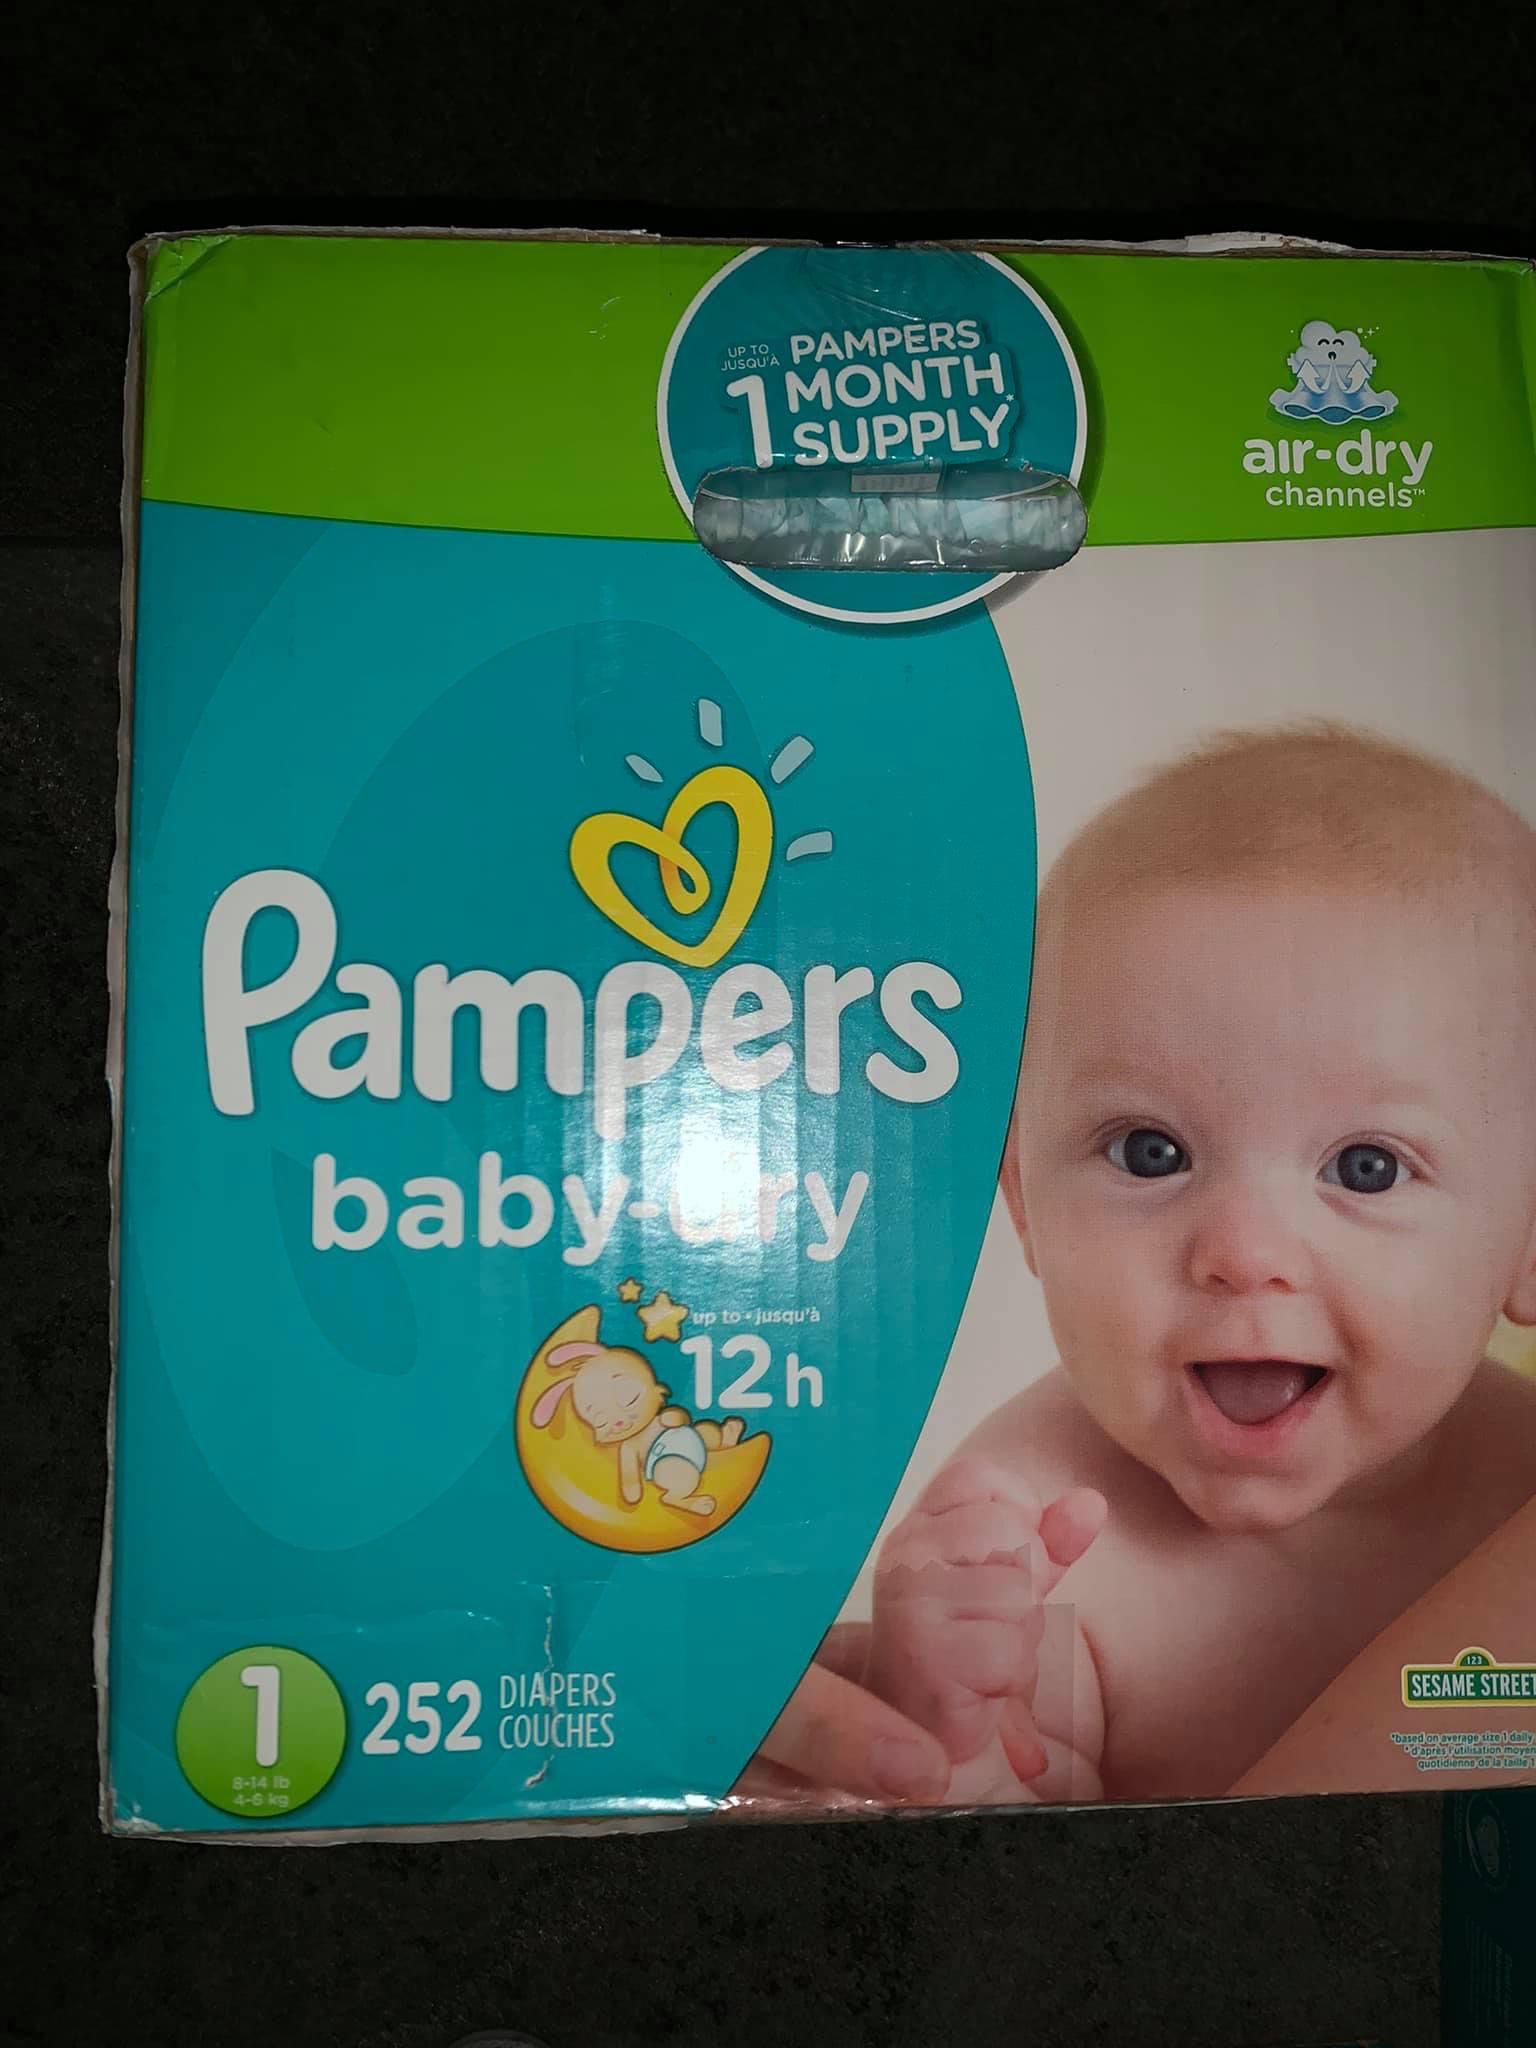 Pampers Baby Dry size 1 Diapers - Pañales 